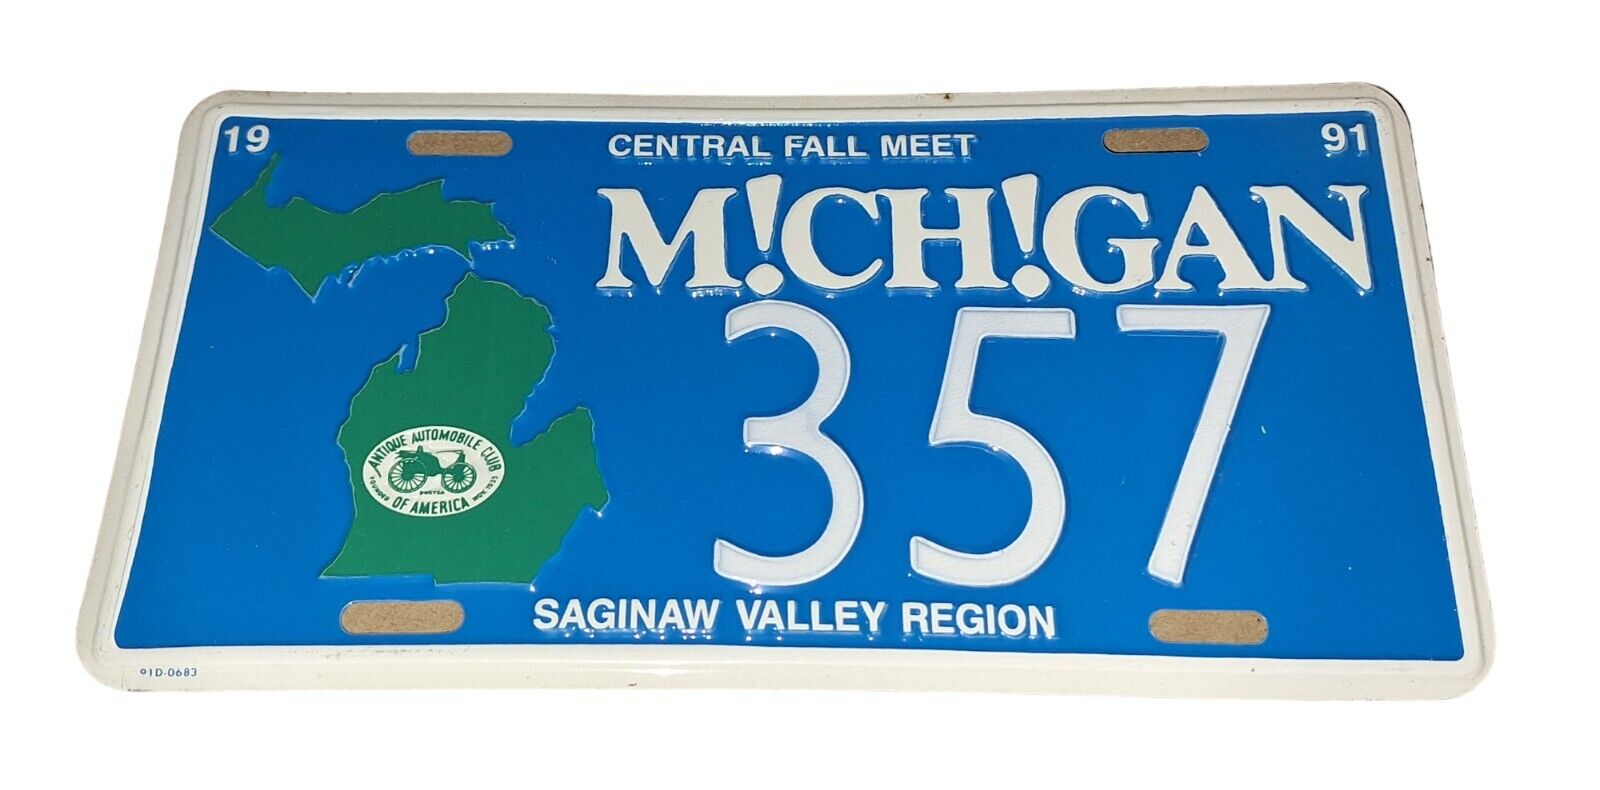 Antique Automobile Club Of America Michigan Central Fall Meet License Plate 